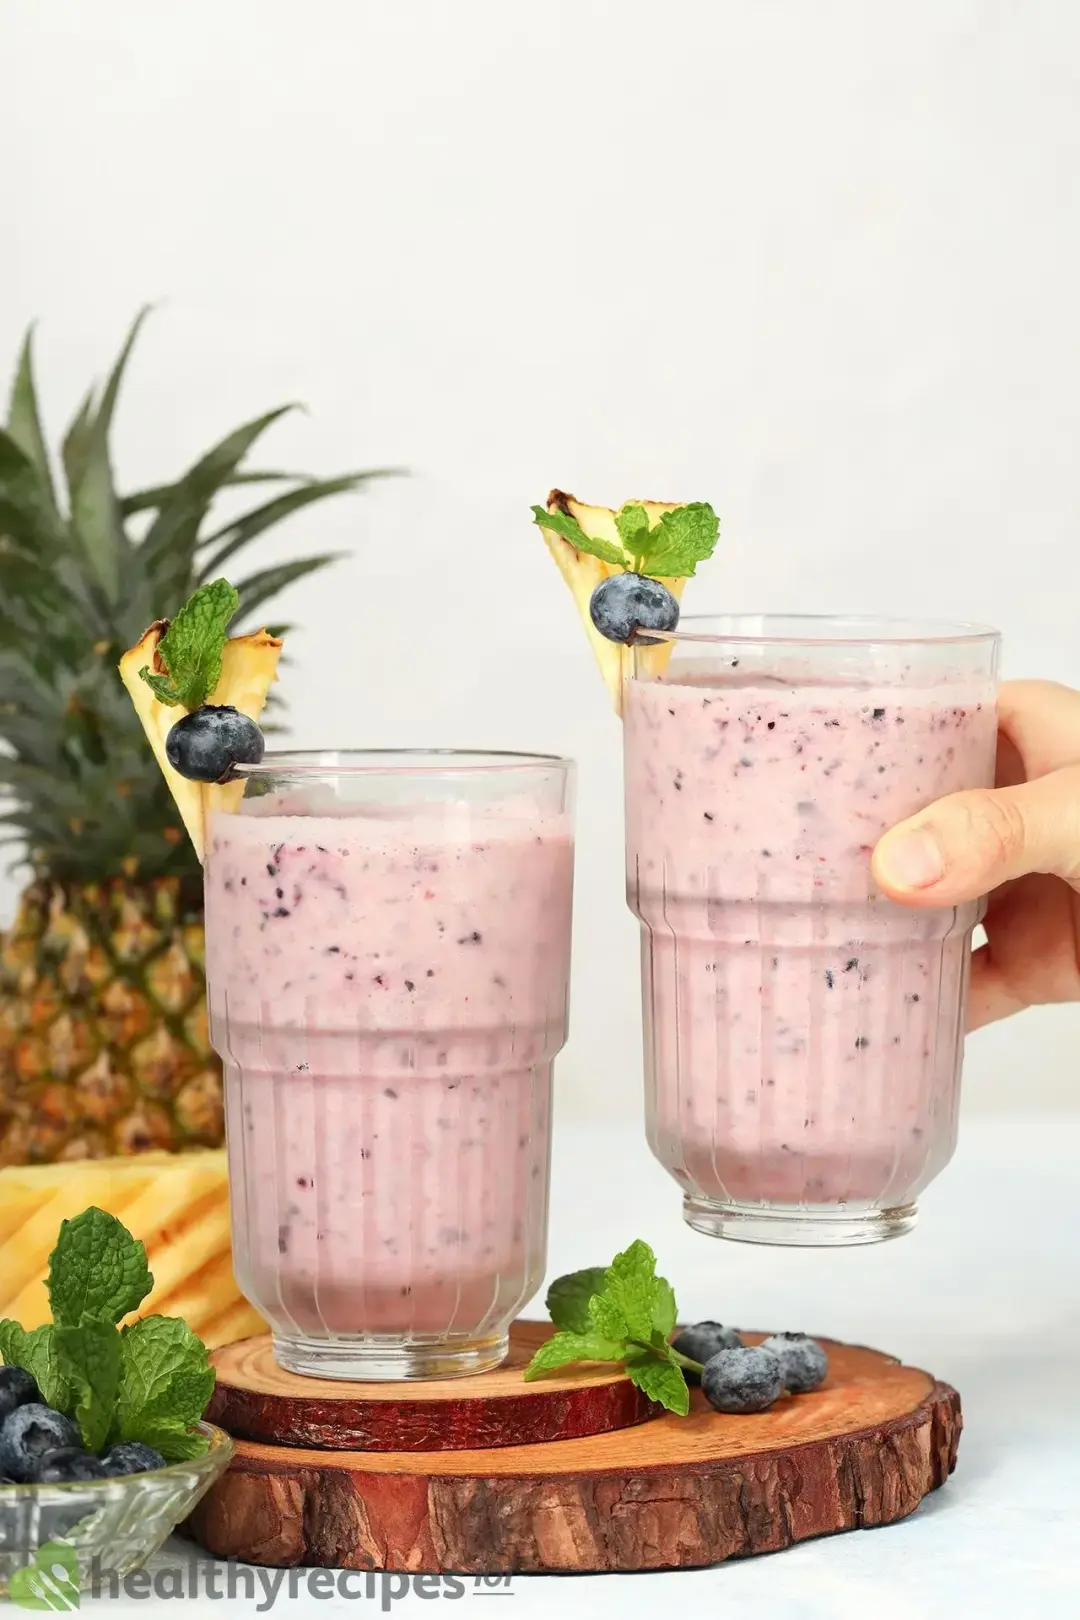 How Long Does Pineapple Blueberry Smoothie Last